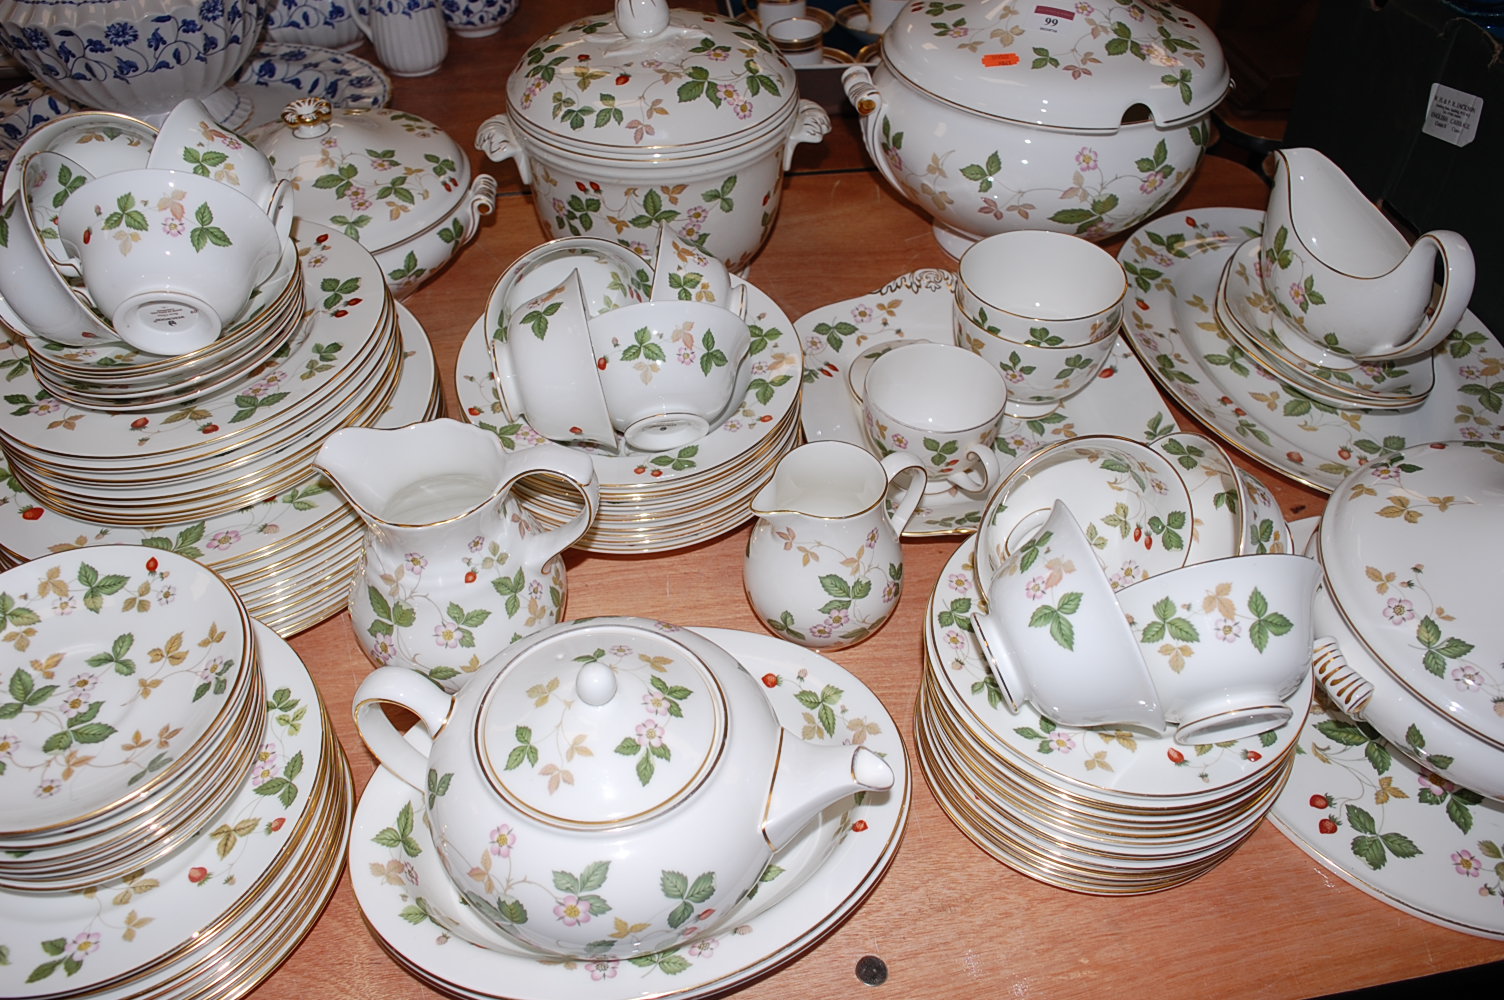 An extensive Wedgwood 12-place setting tea and dinner service in the Wild Strawberry pattern to